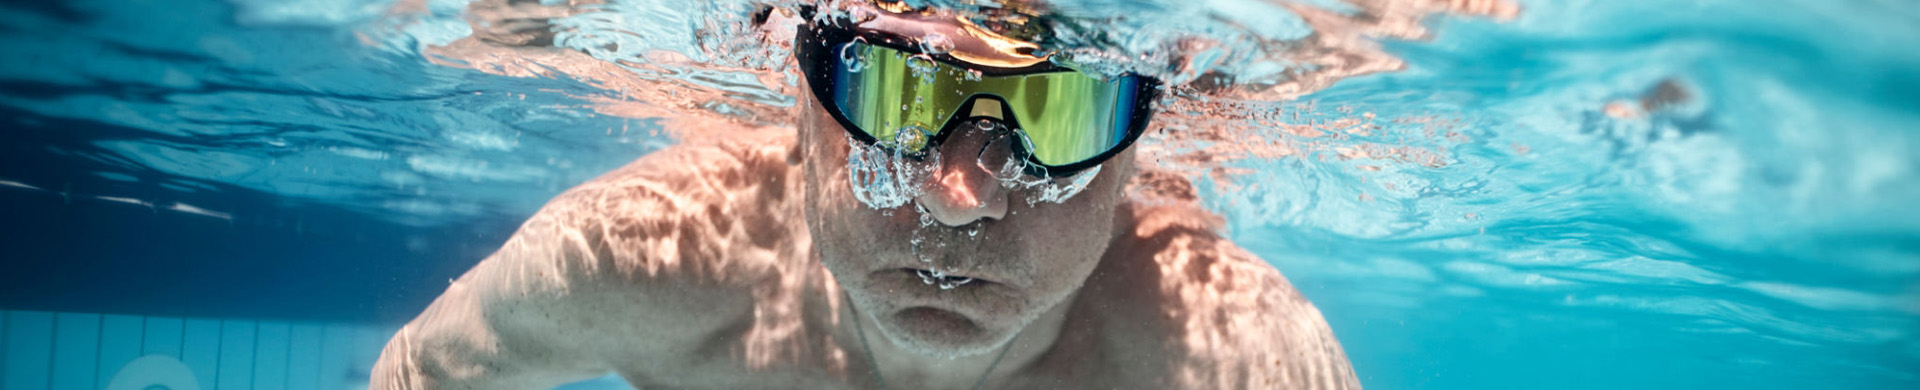 man underwater with goggles